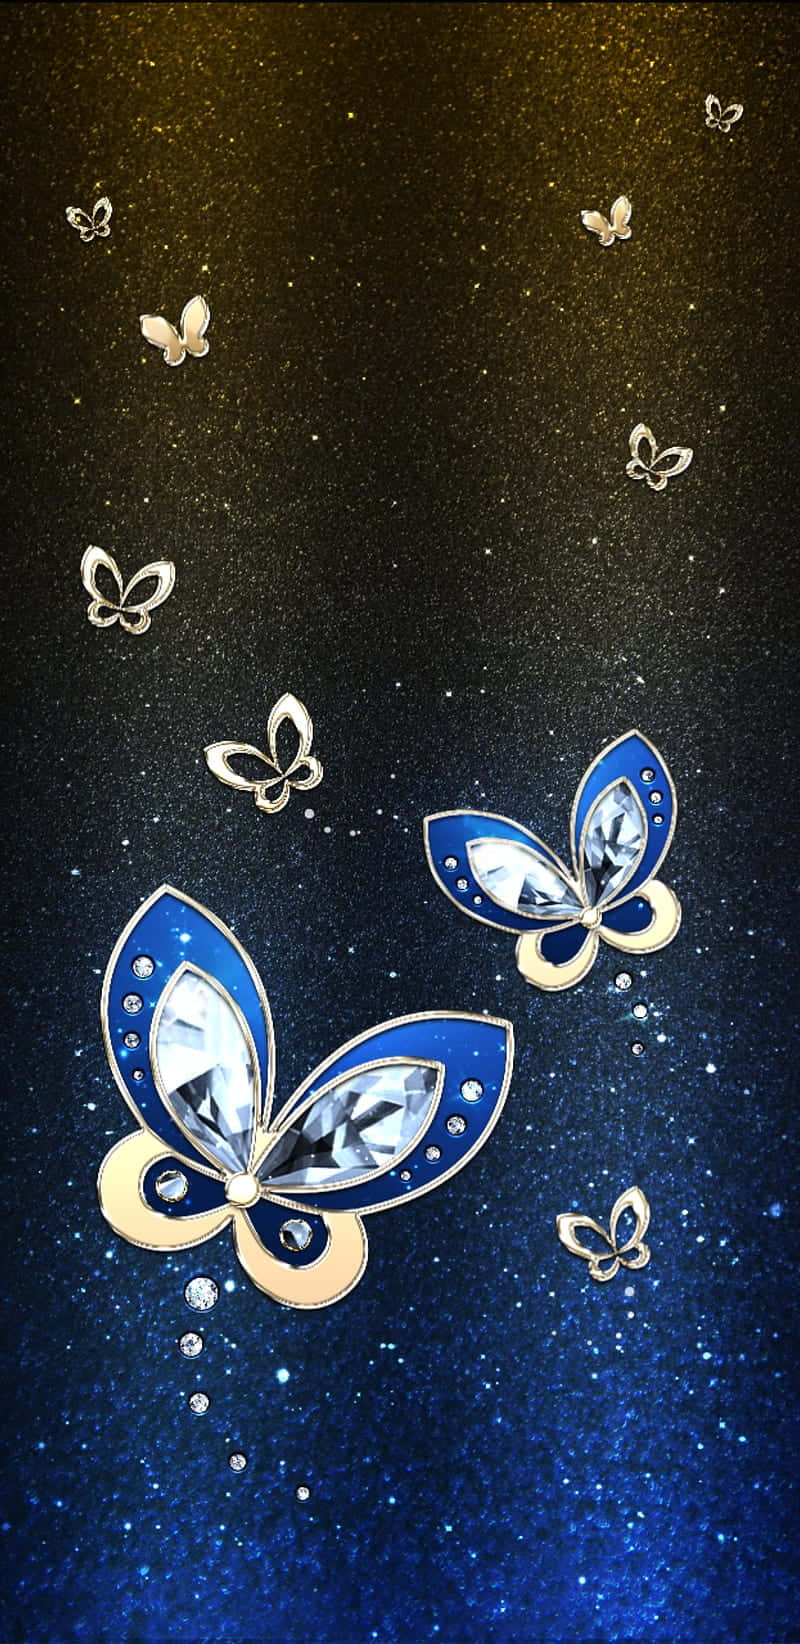 A glowing luminescent butterfly in a fairytale sky. Wallpaper